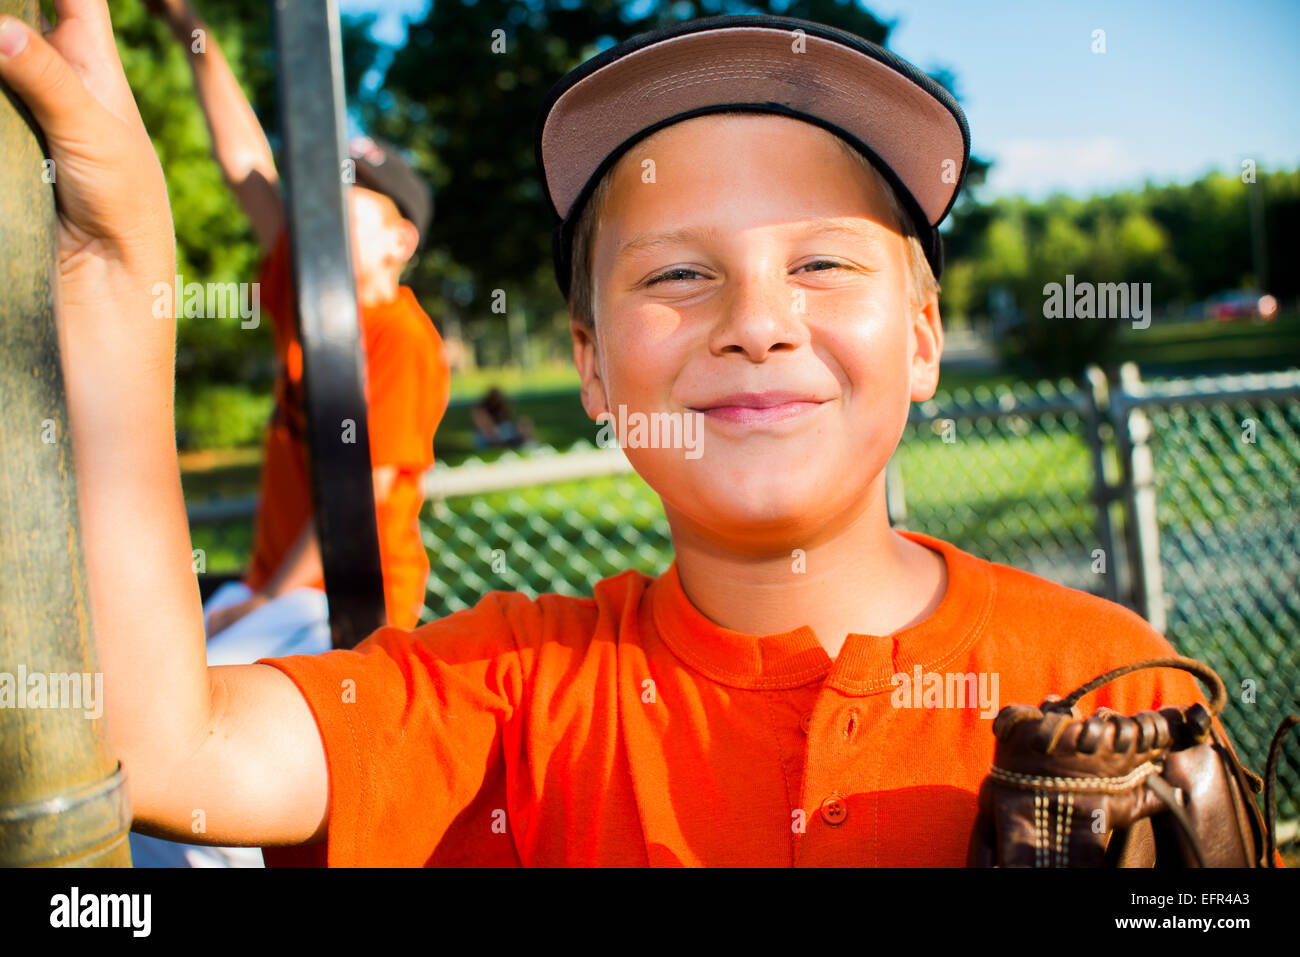 Portrait of young male baseball player Banque D'Images